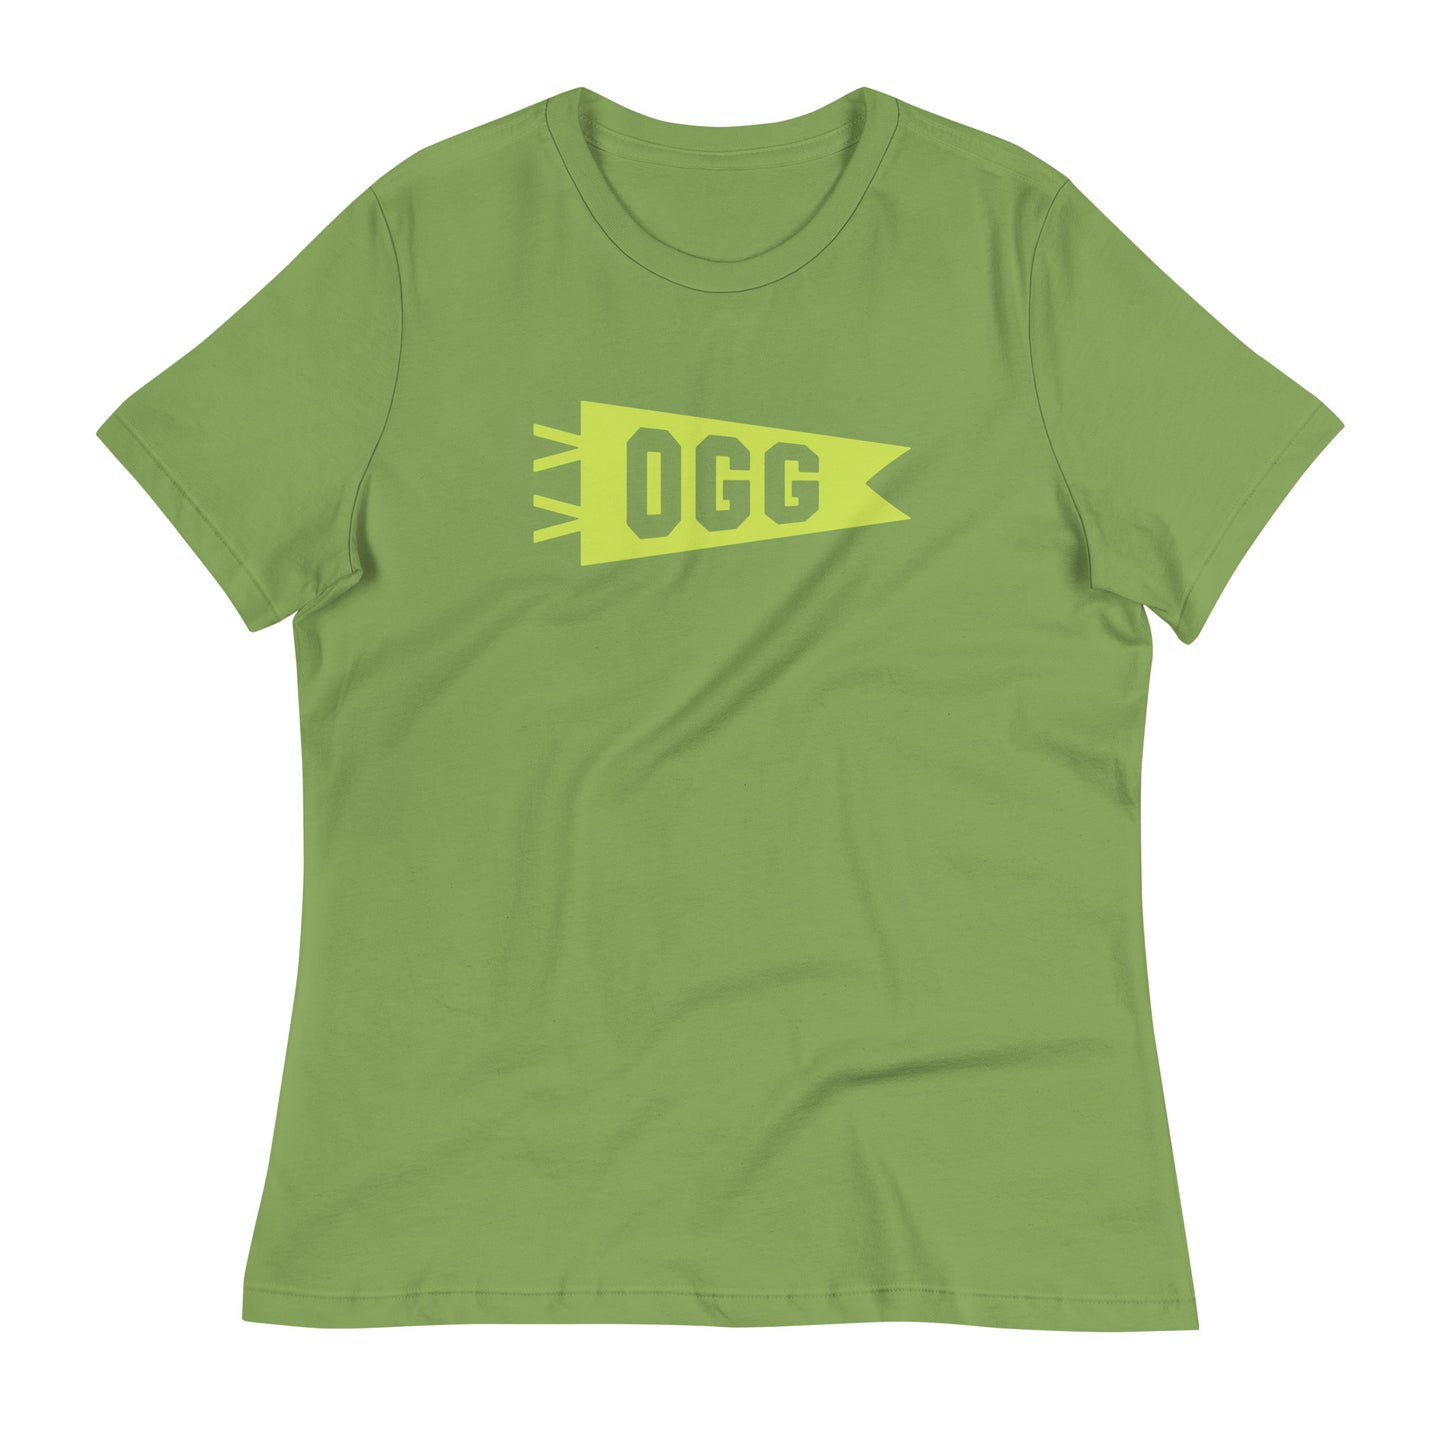 Airport Code Women's Tee - Green Graphic • OGG Maui • YHM Designs - Image 02